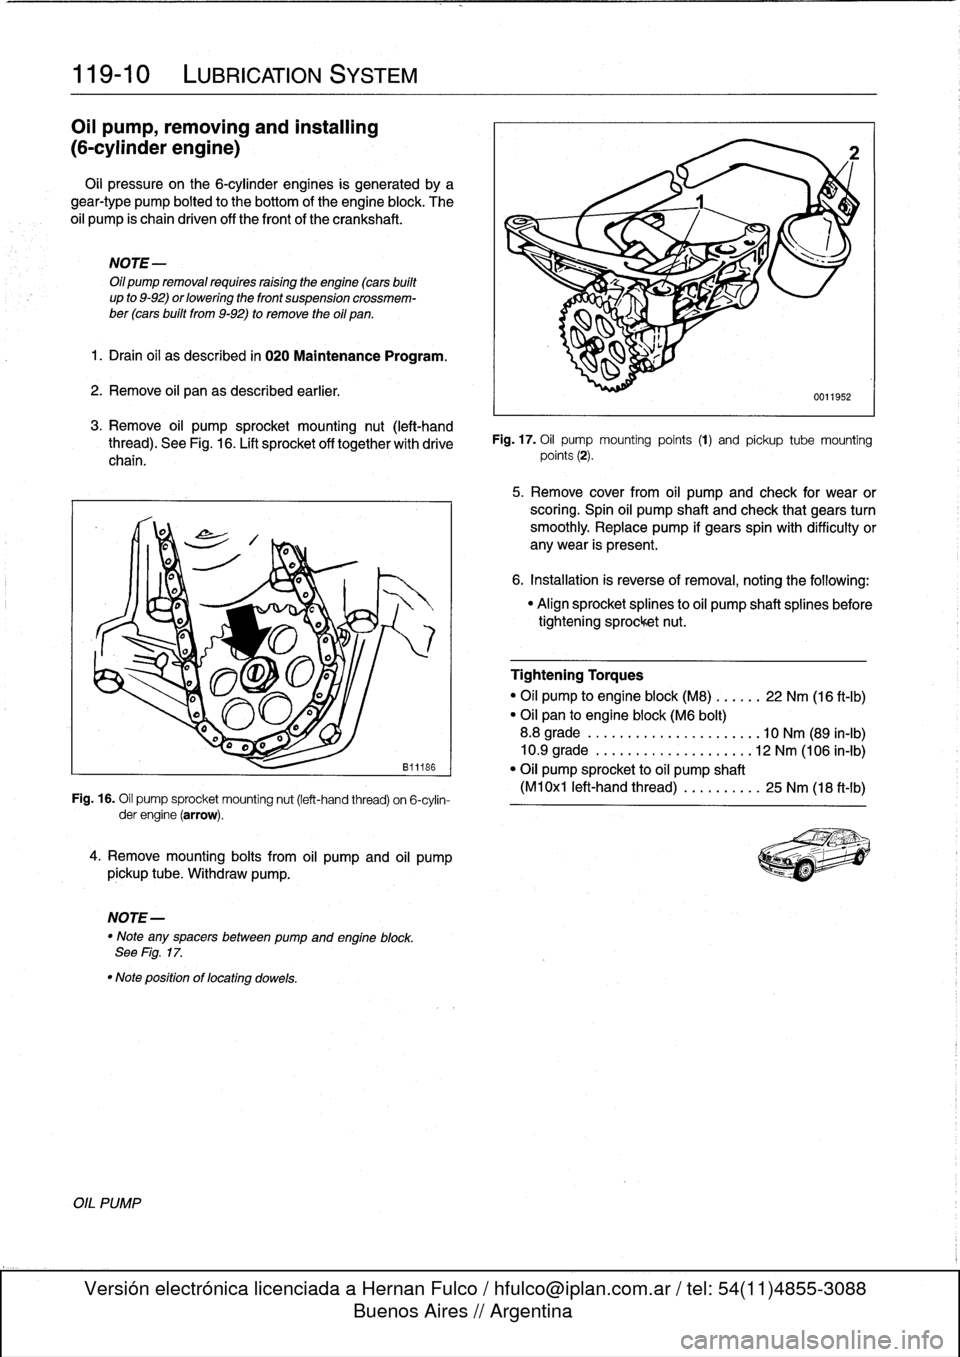 BMW 318i 1997 E36 Service Manual 
119-
1
0

	

LUBRICATION
SYSTEM

Oil
pump,
removing
and
installing

(6-cylinder
engine)

Oil
pressure
on
the
6-cylinder
engines
is
generated
by
a
gear-type
pump
bolted
to
the
bottom
of
the
engine
blo